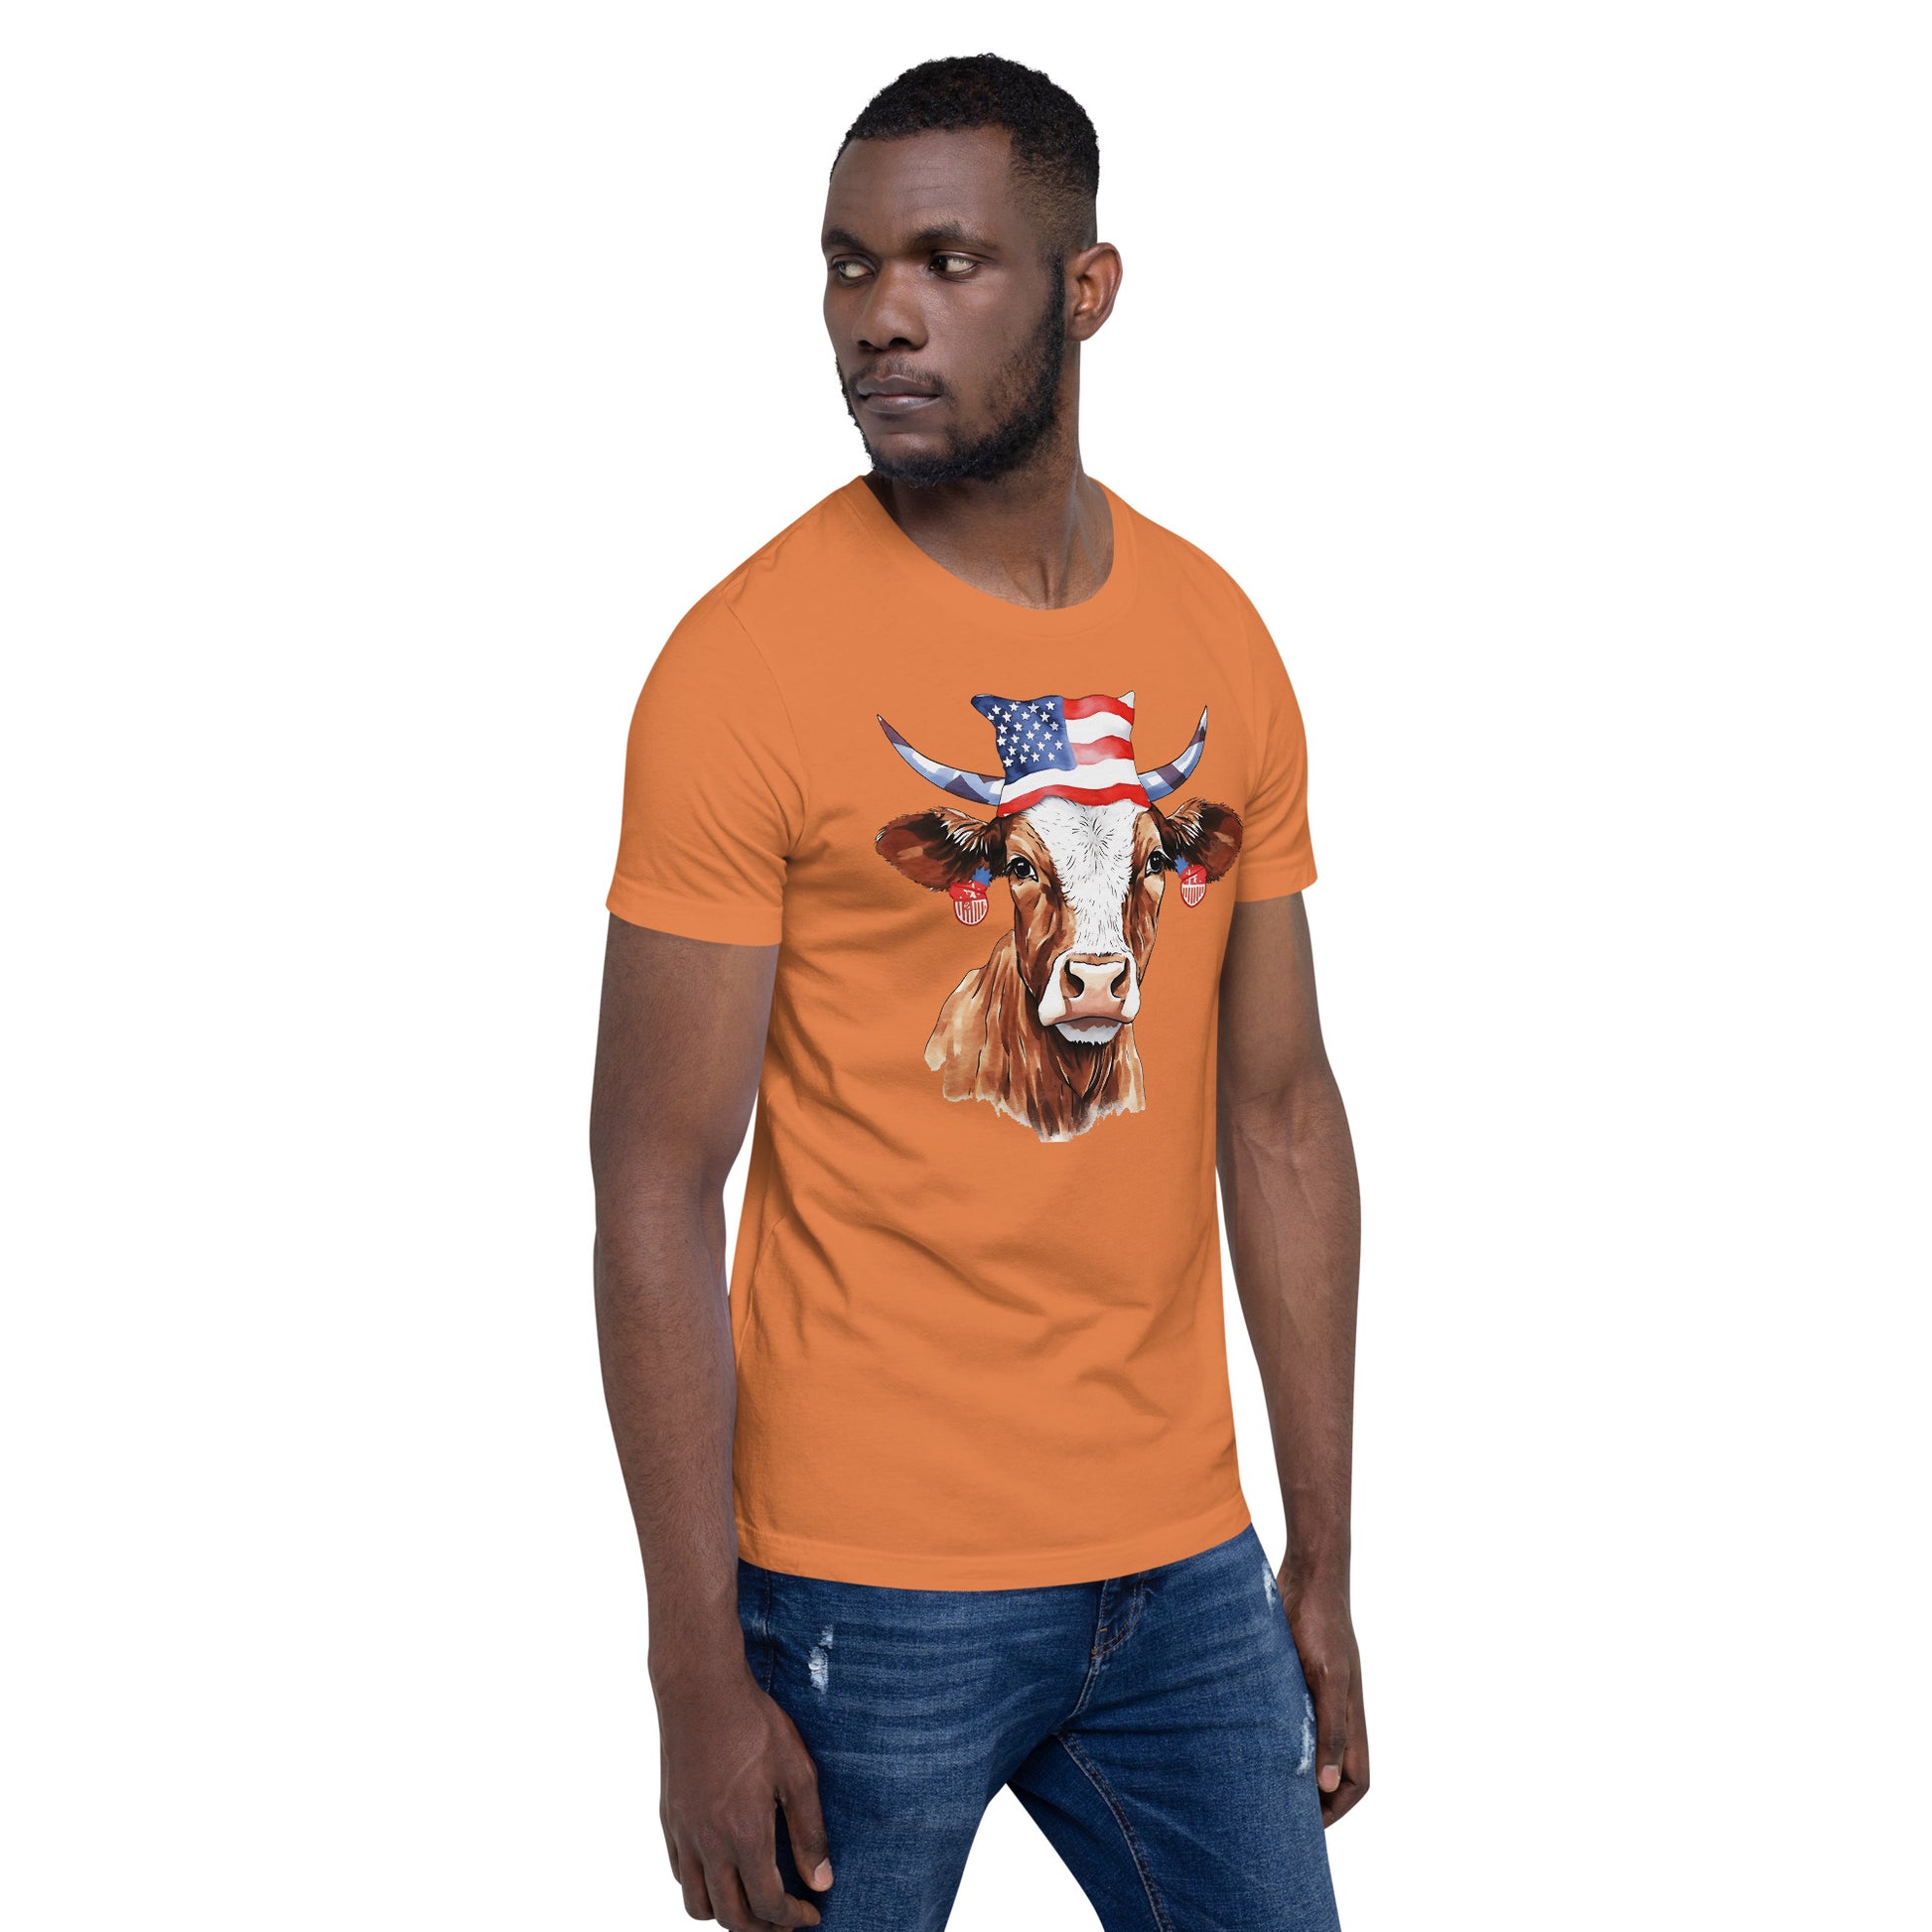 Patriotic Cow Tshirt For Cow Lovers And America  Lovers